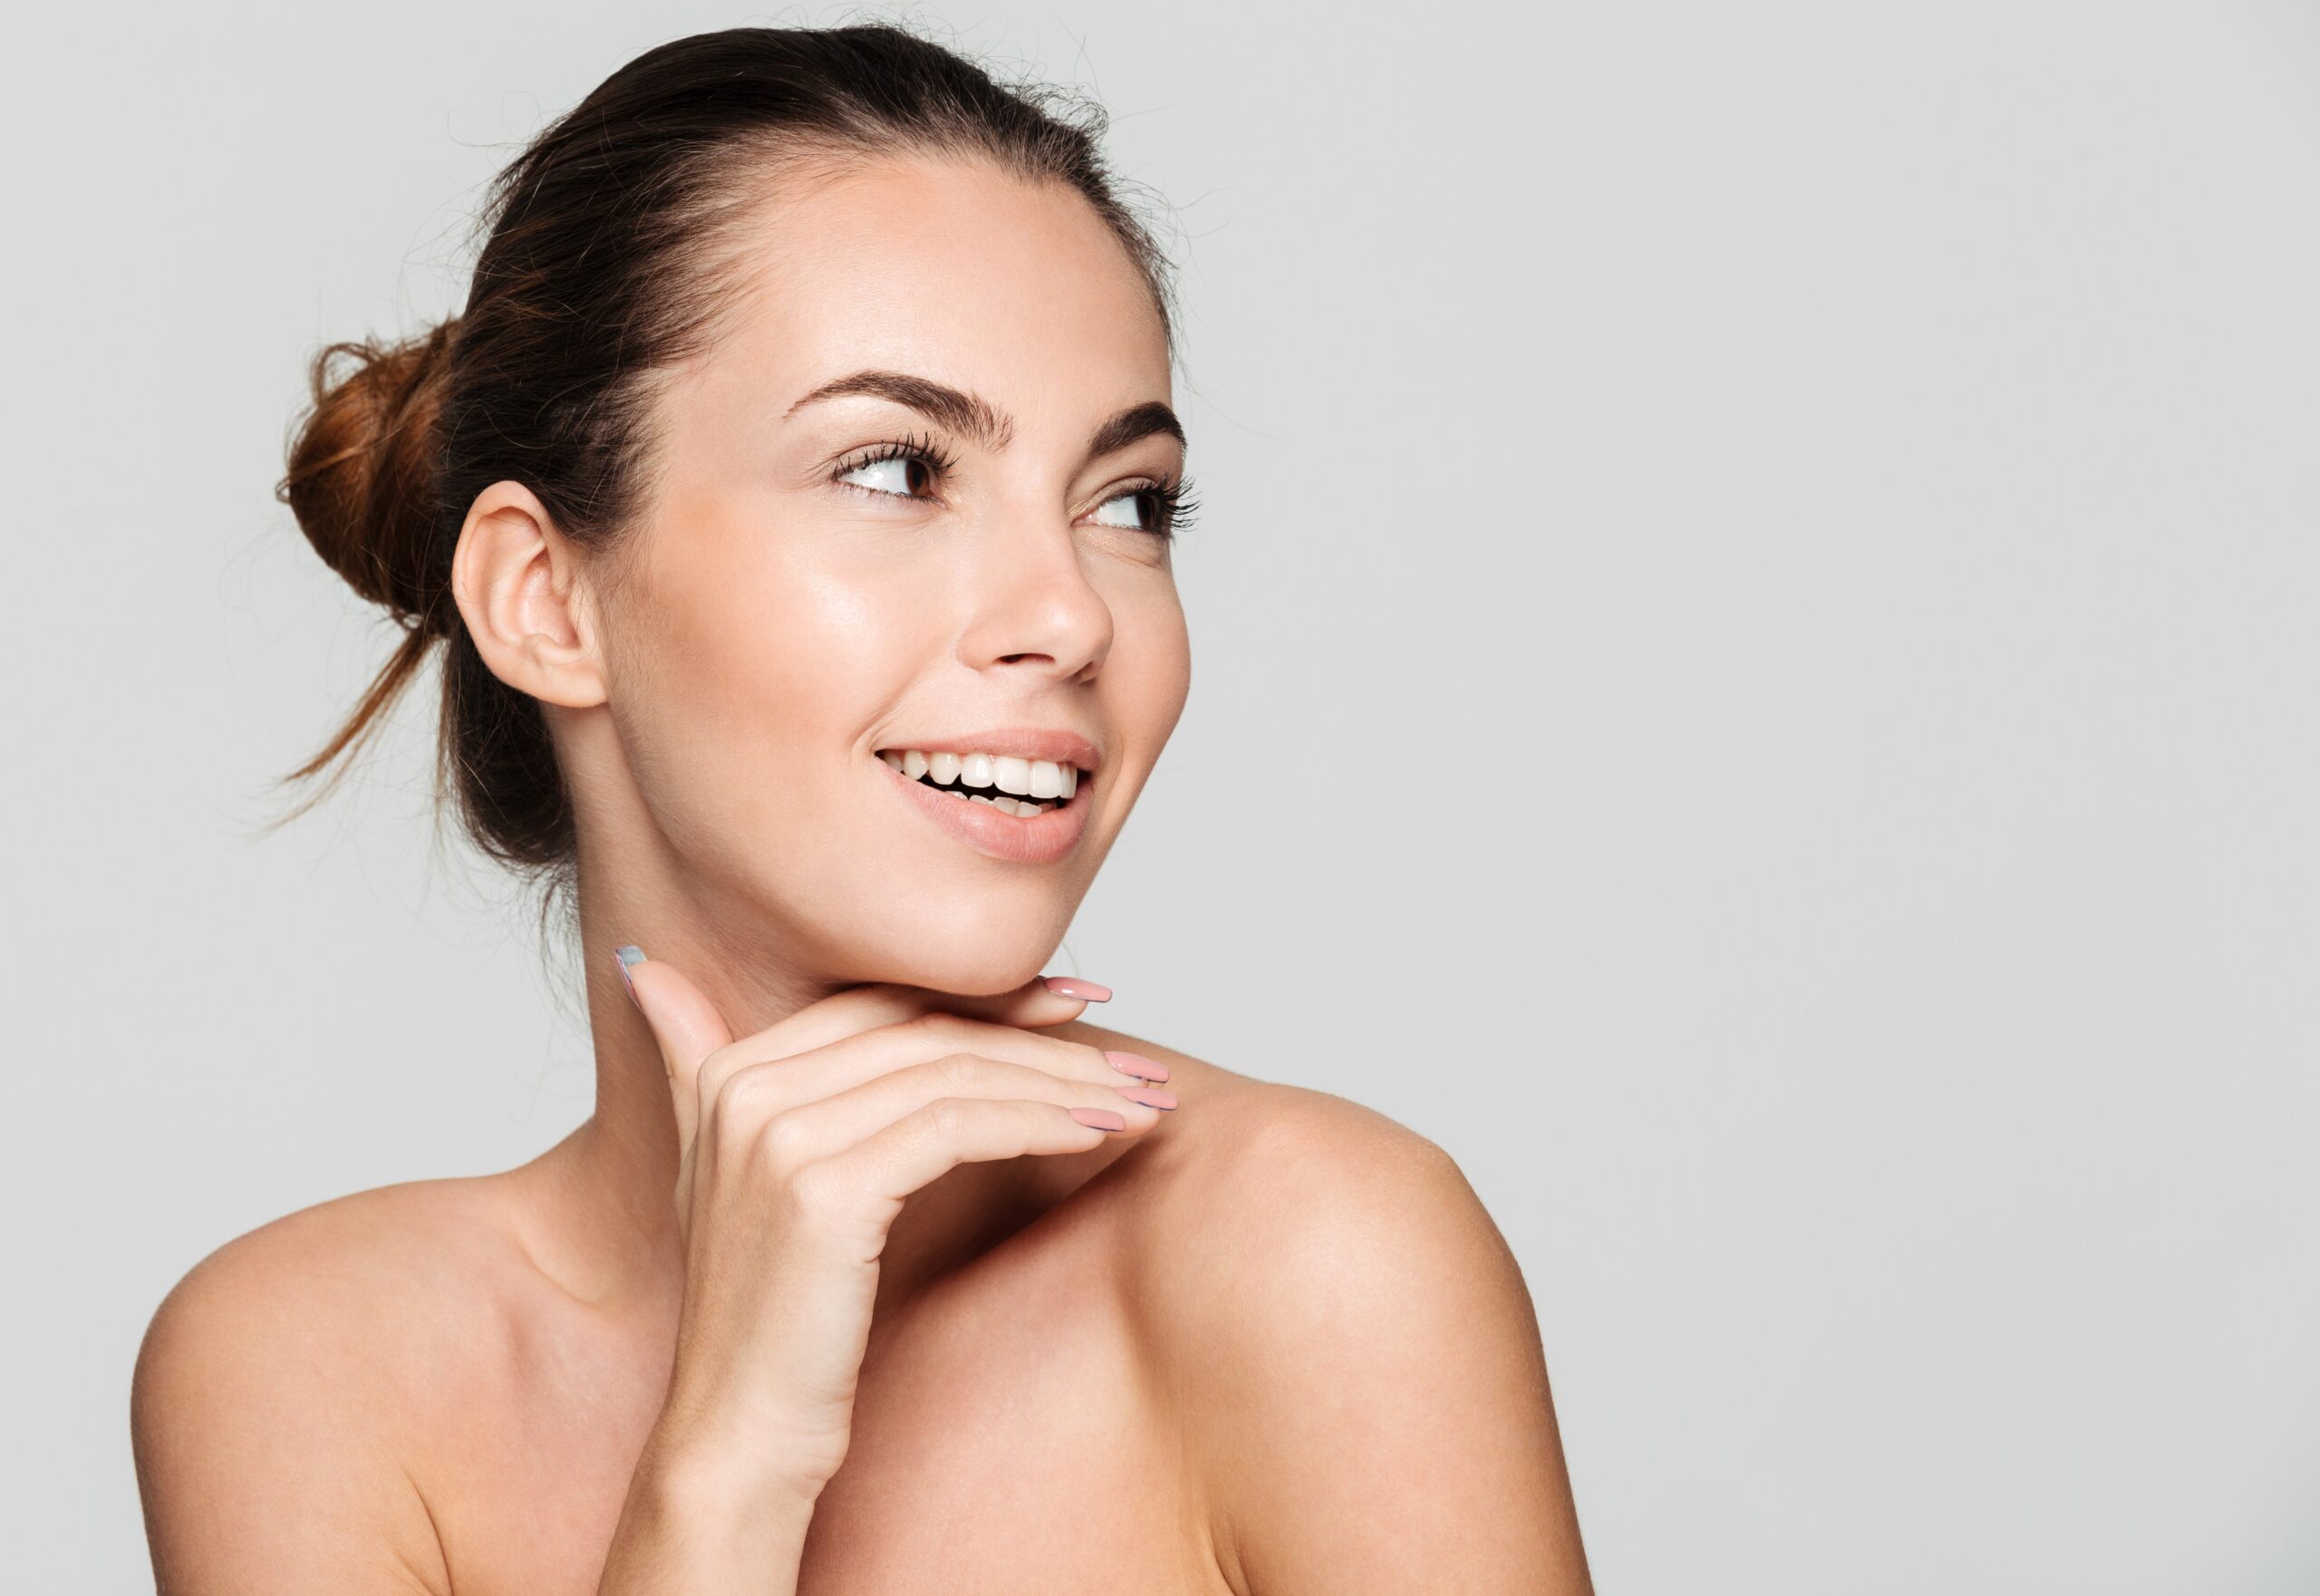 How to effectively treat hyperpigmentation